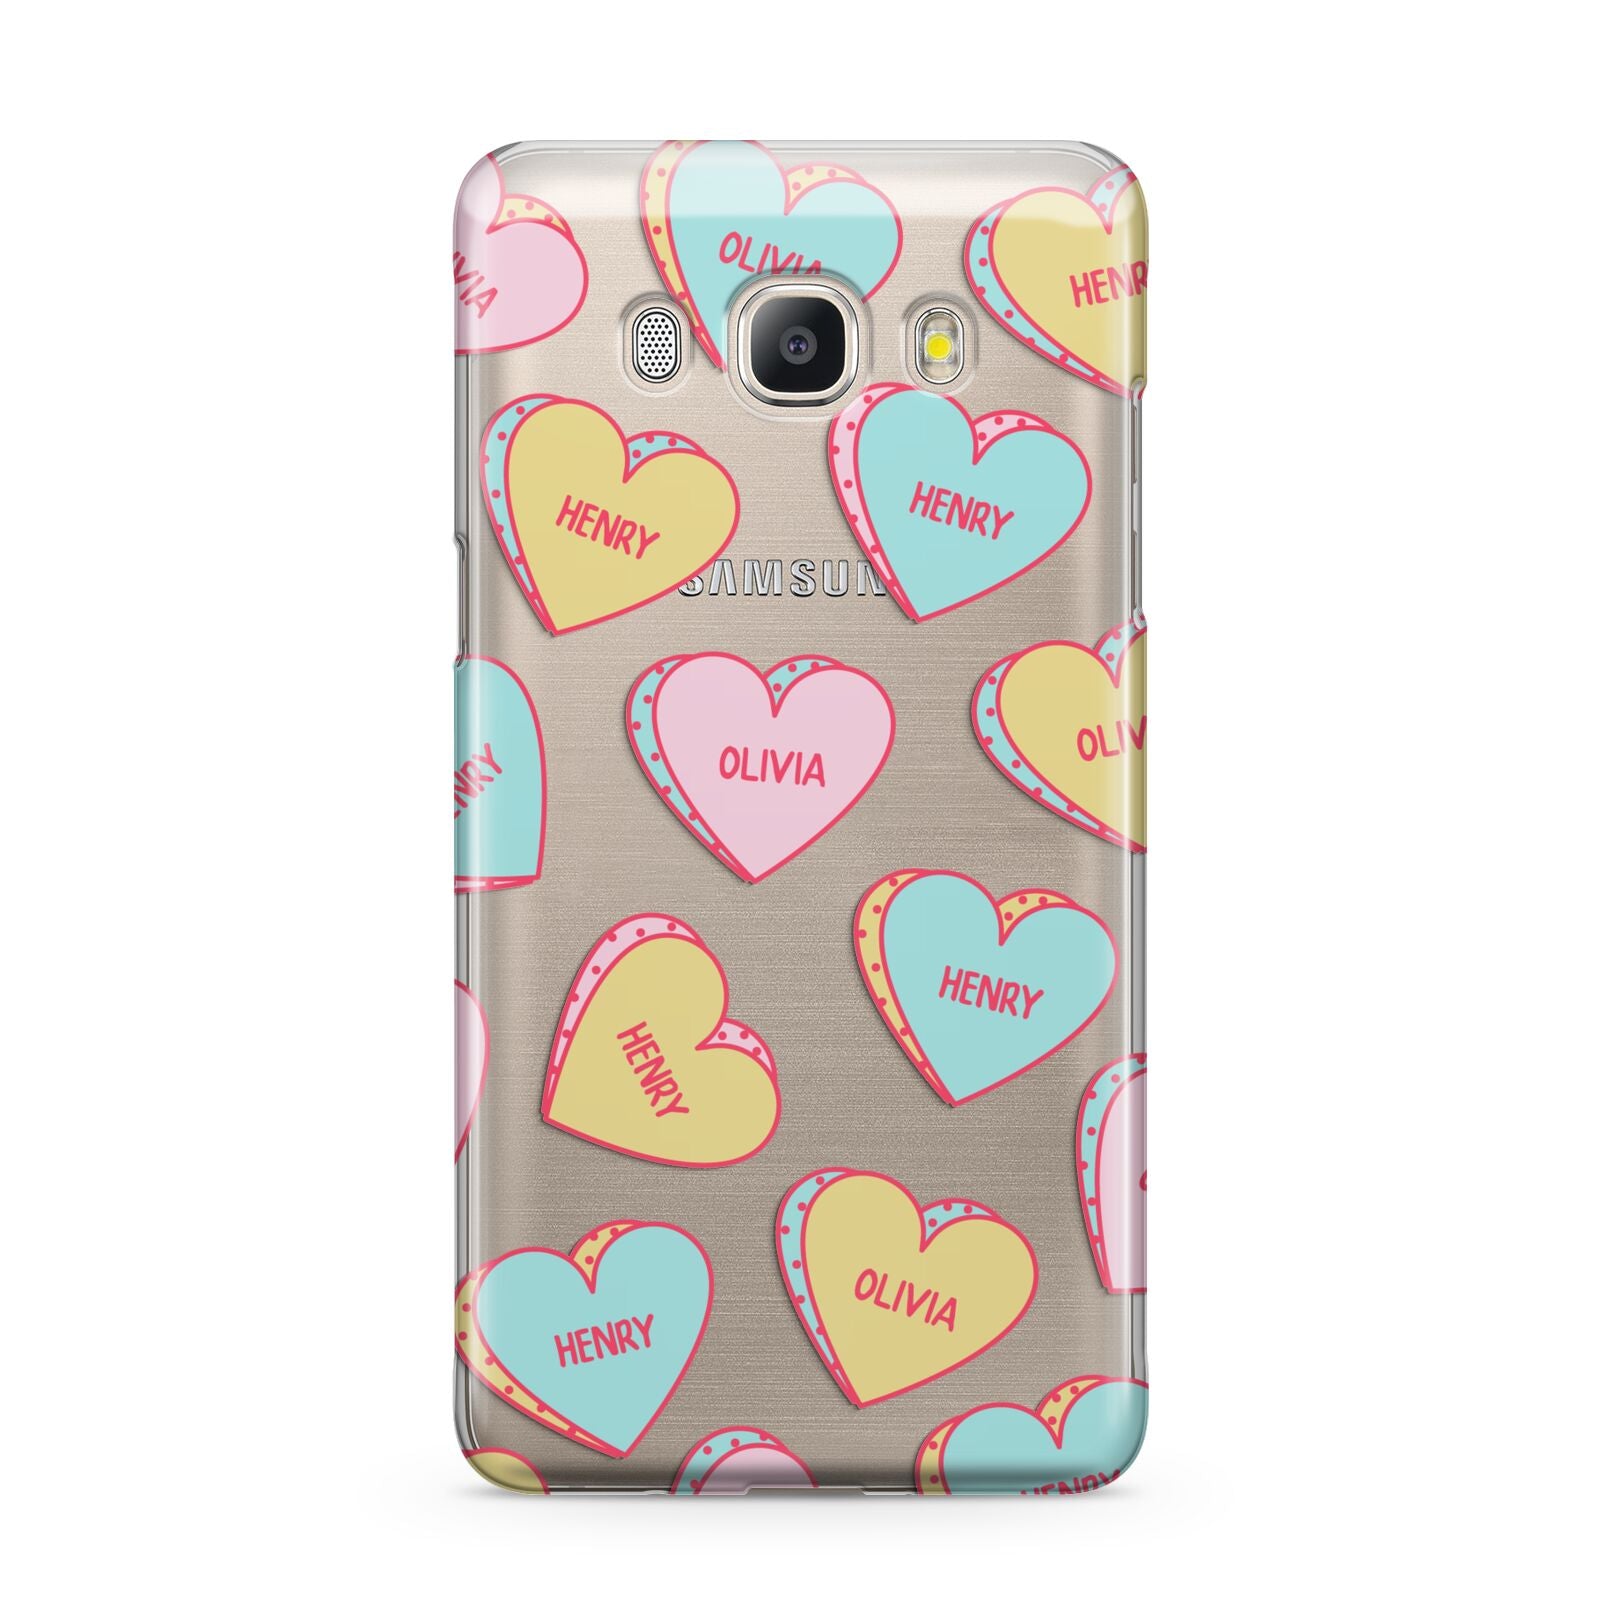 Personalised Heart Sweets Samsung Galaxy J5 2016 Case